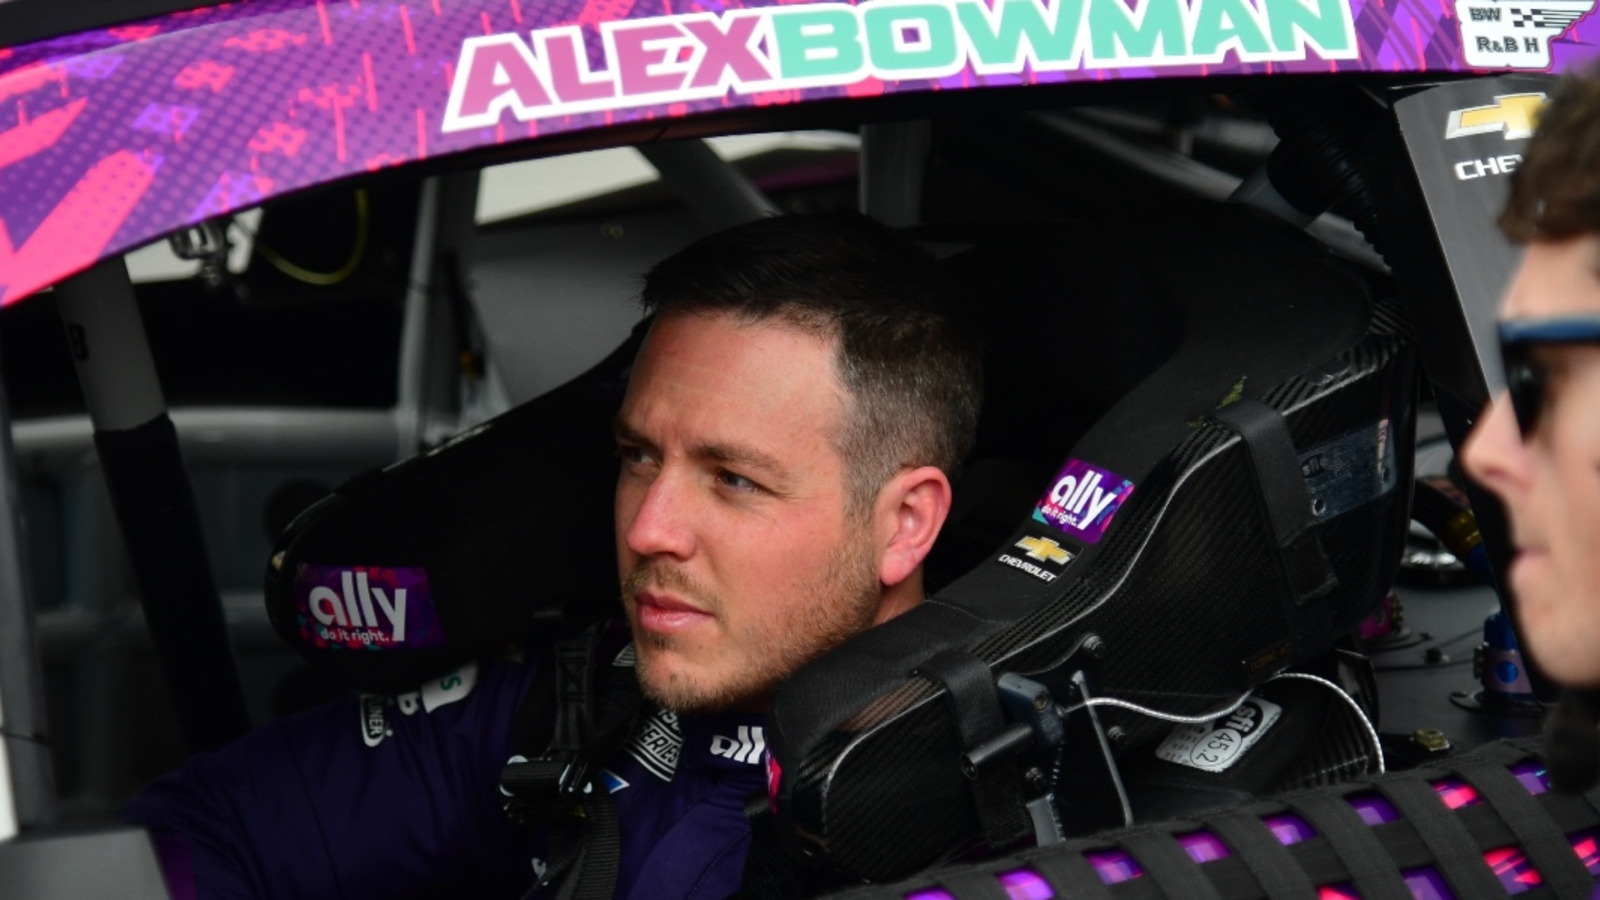 Alex Bowman isn’t worried about his seat at Hendrick Motorsports: ‘They have faith in me’